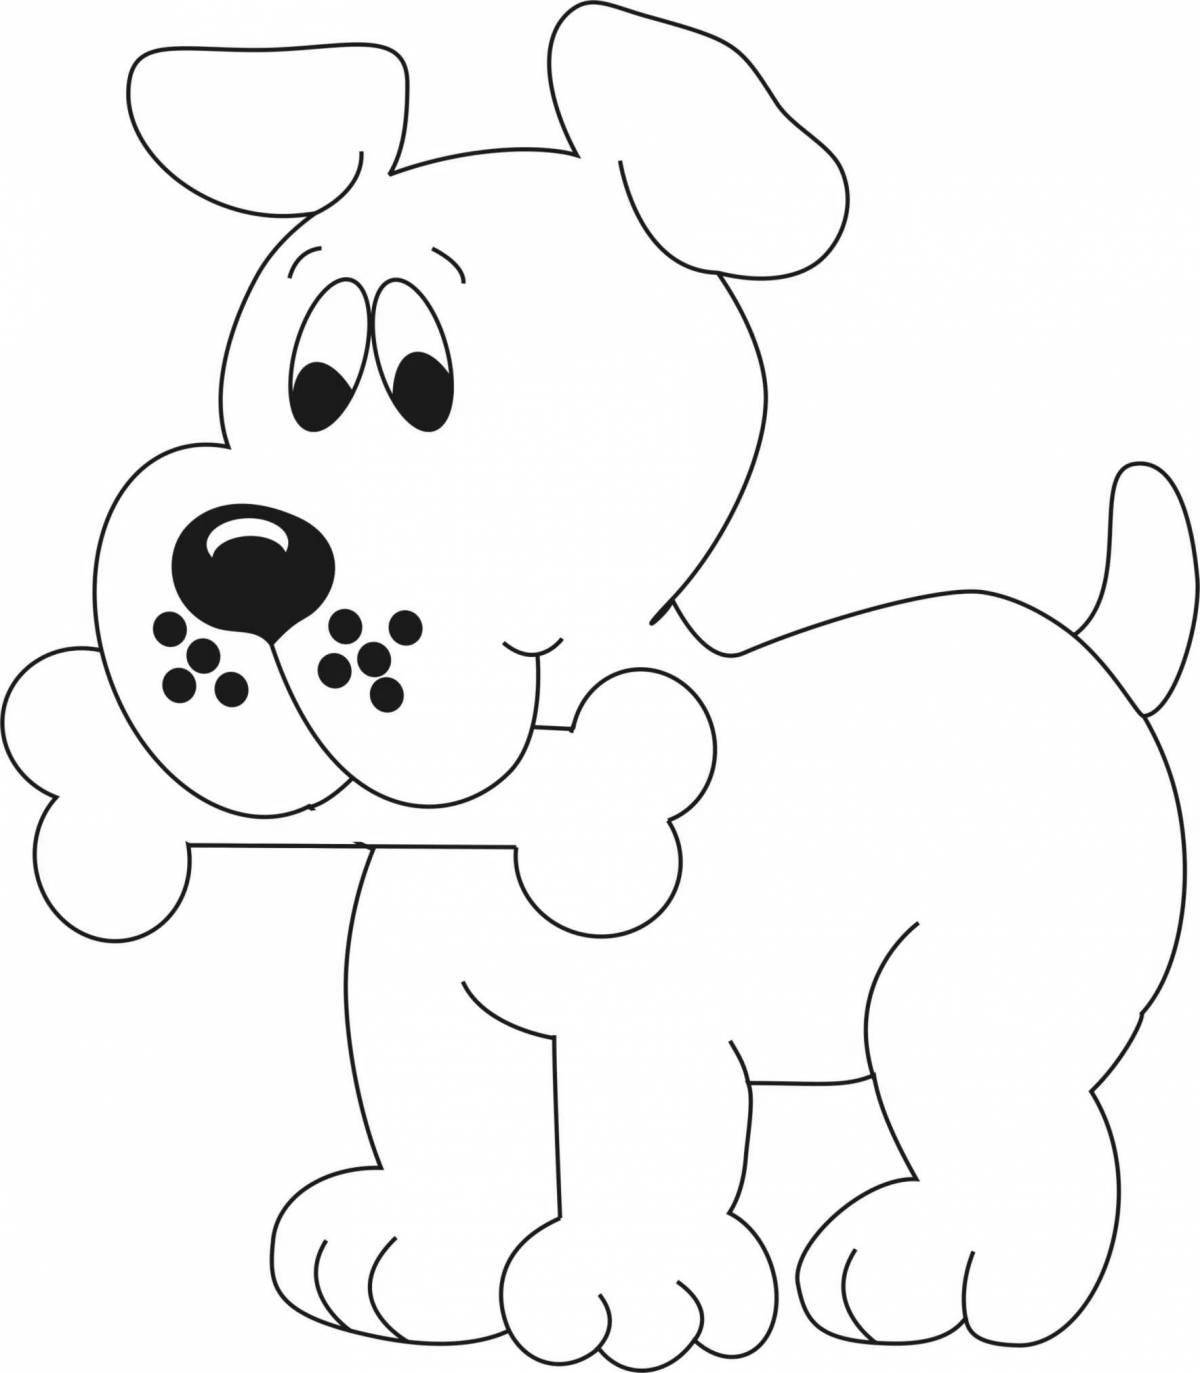 Incredible dog coloring book for 3-4 year olds